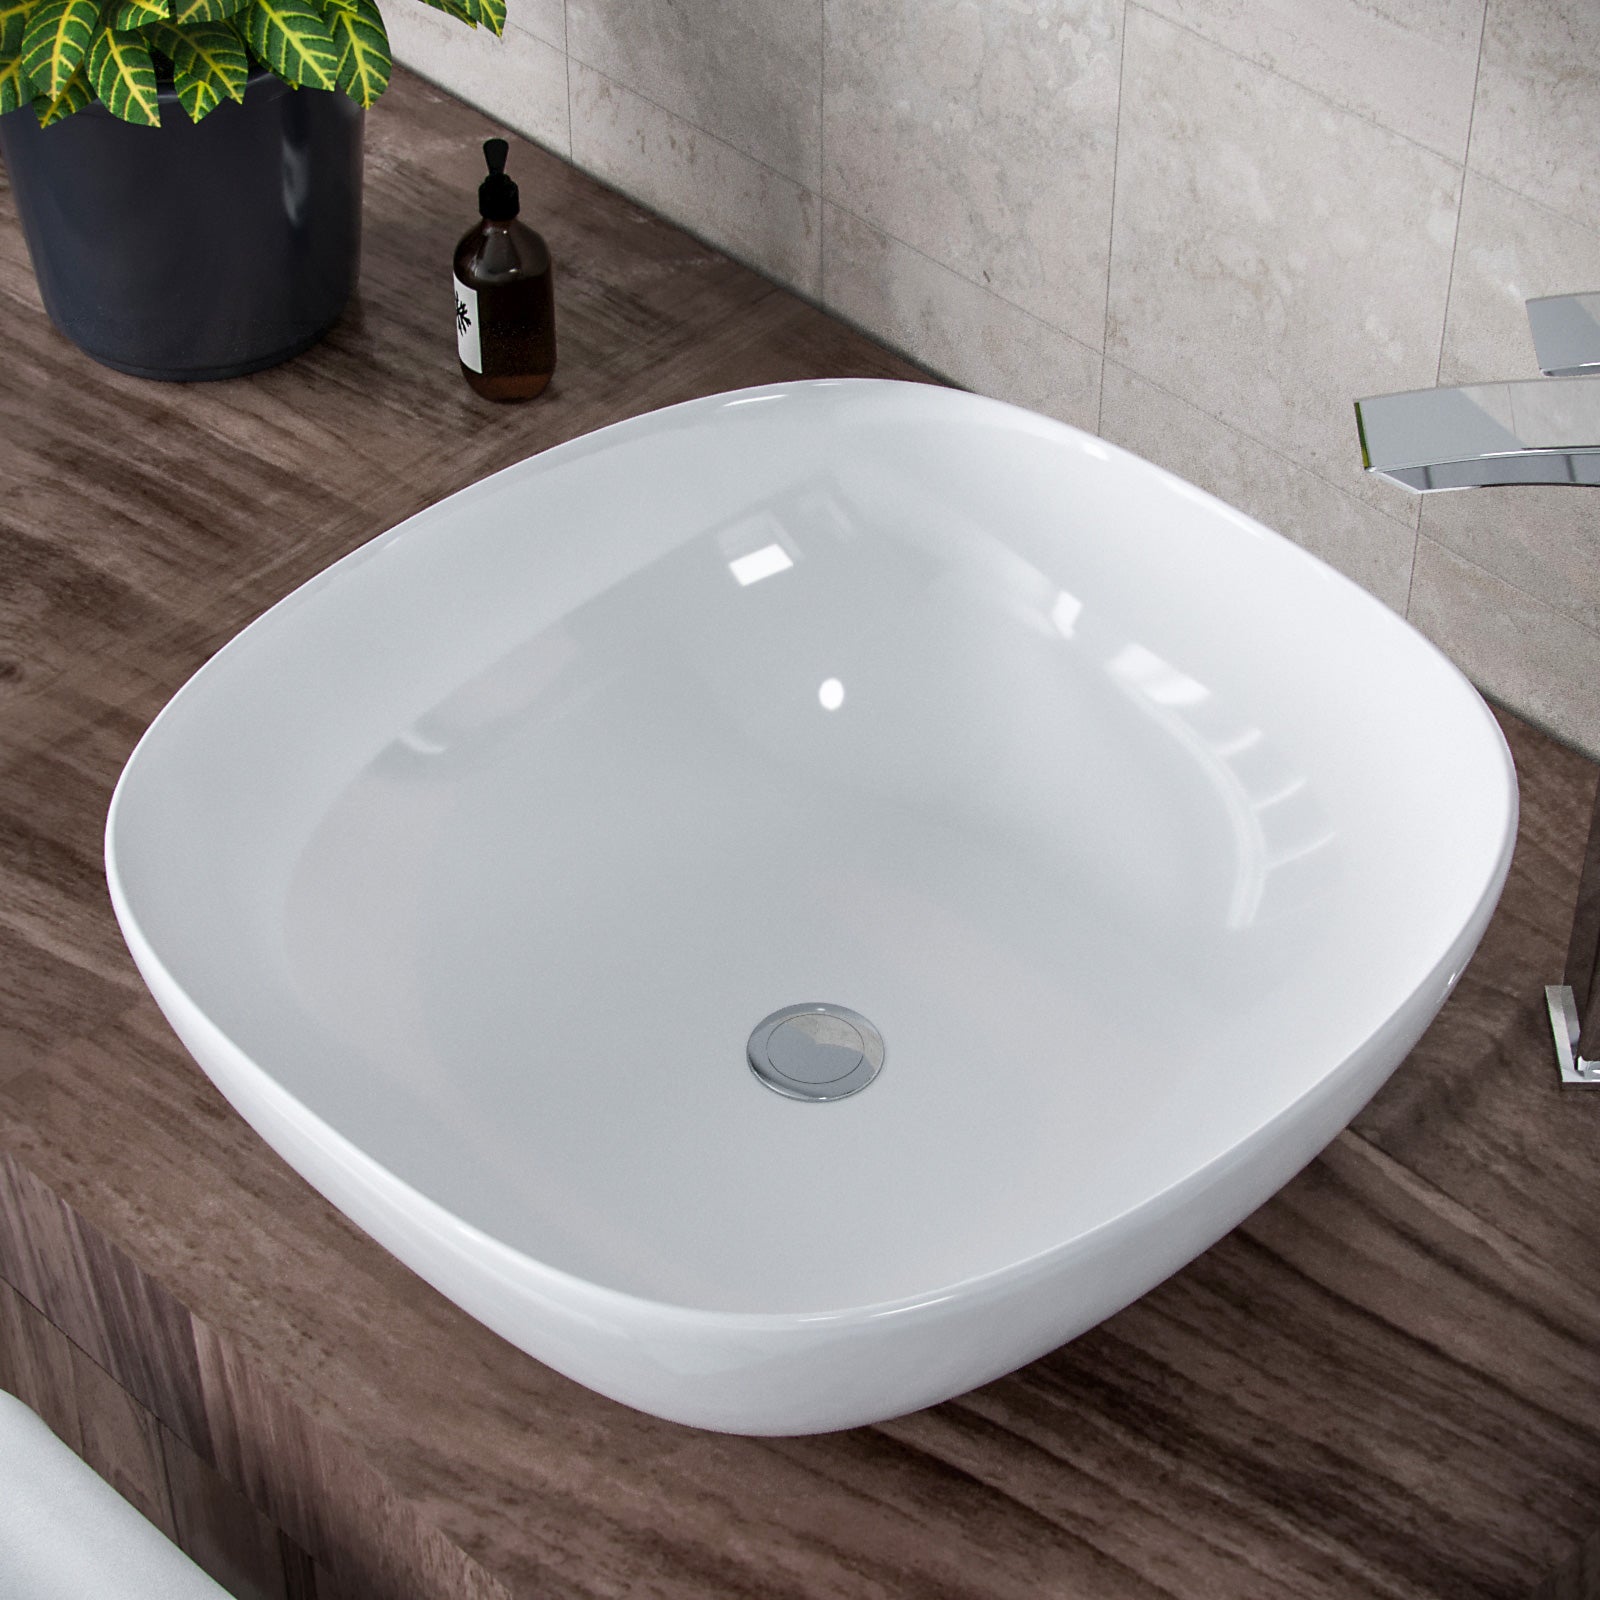 Etive 410mm Square Rounded Cloakroom Counter Top Basin Sink Bowl